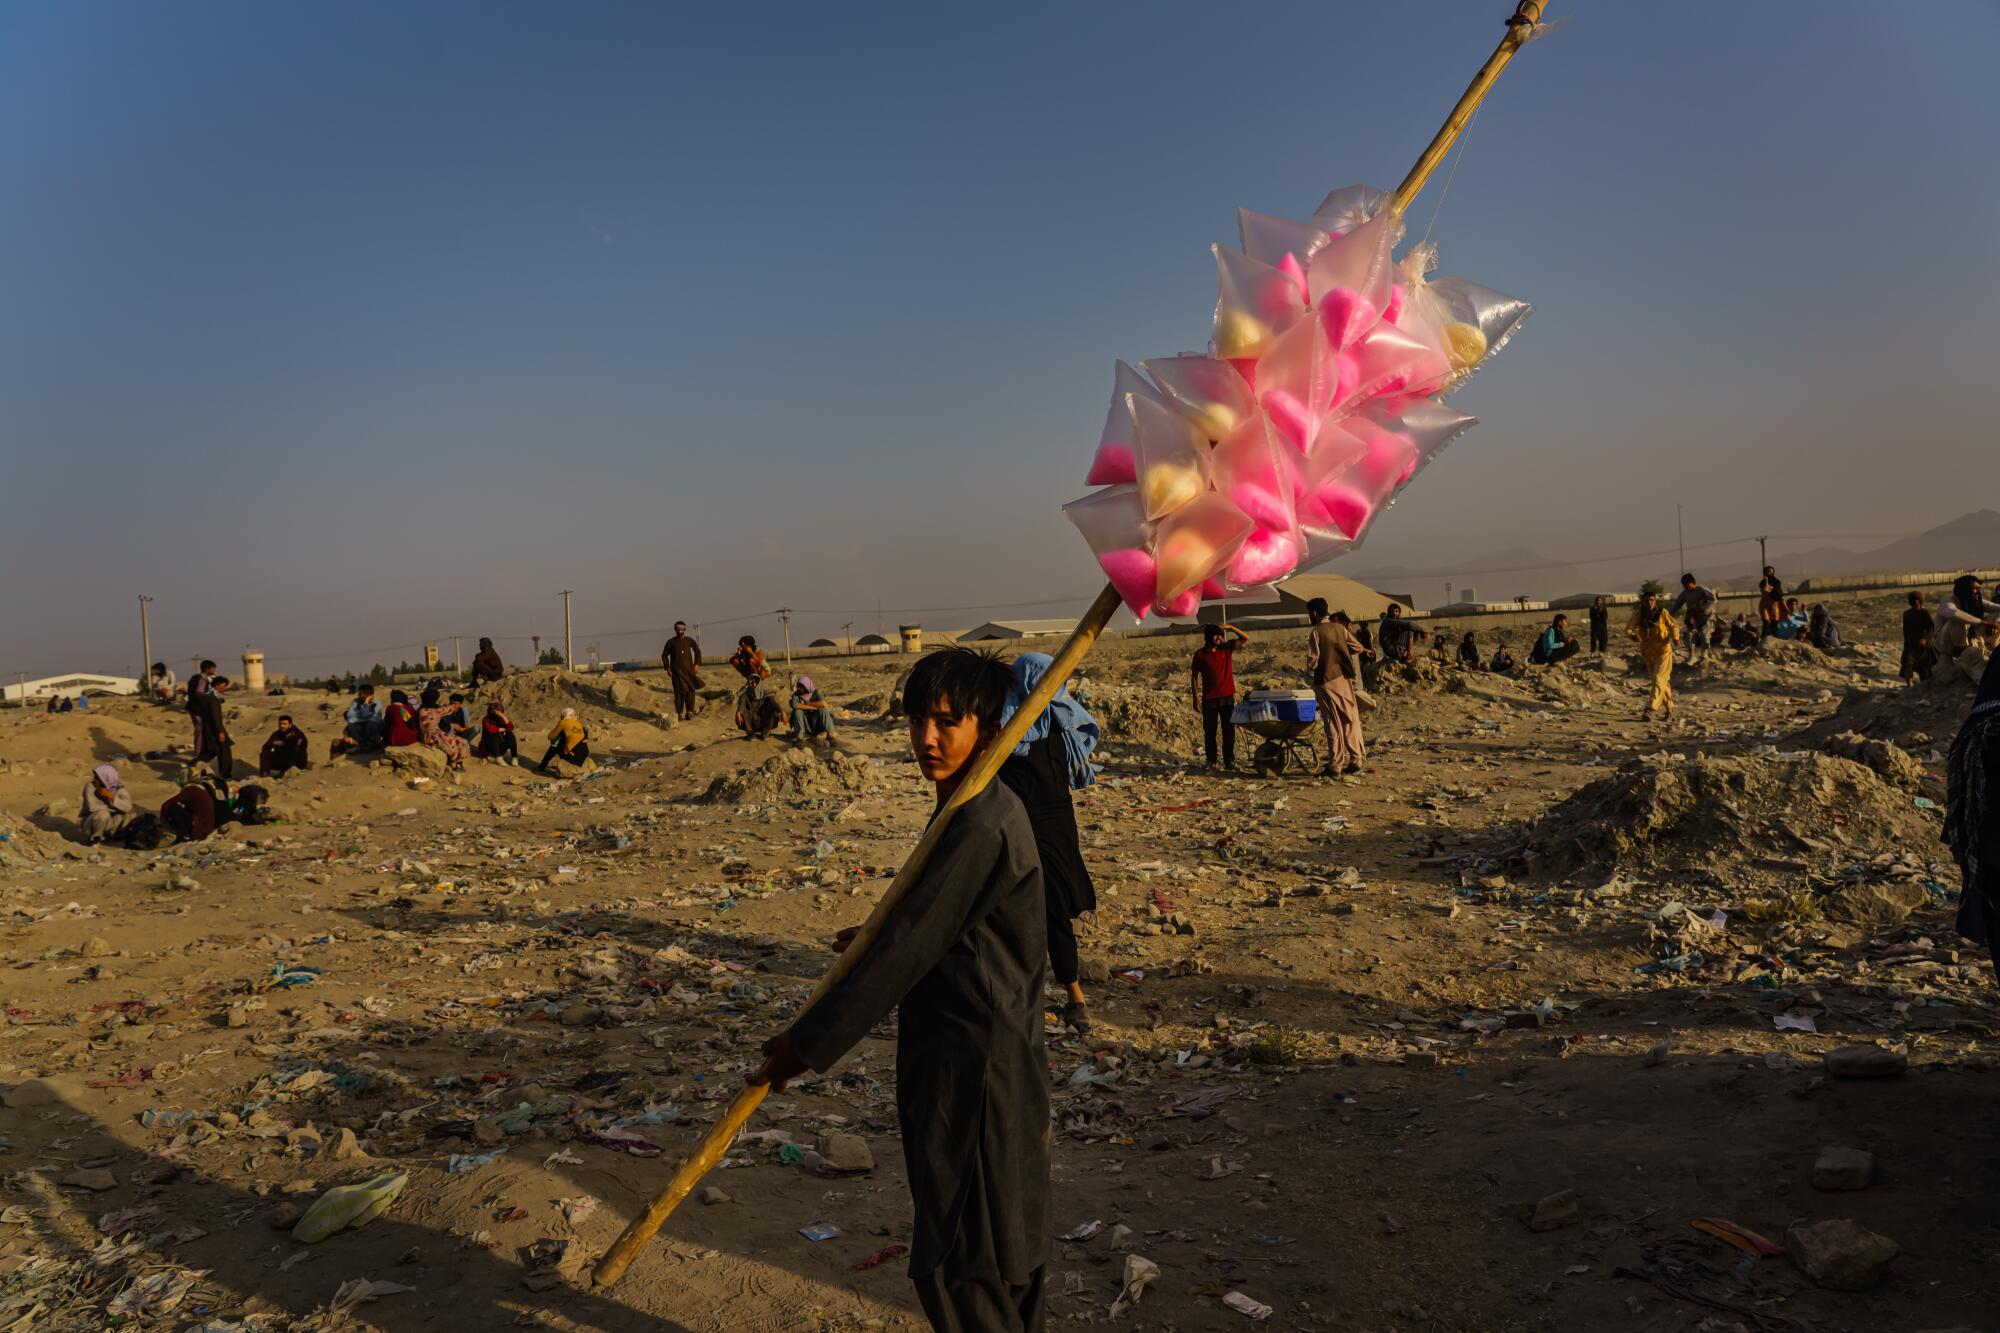 A boy sells cotton candy in the area where Afghans are waiting outside the airport 